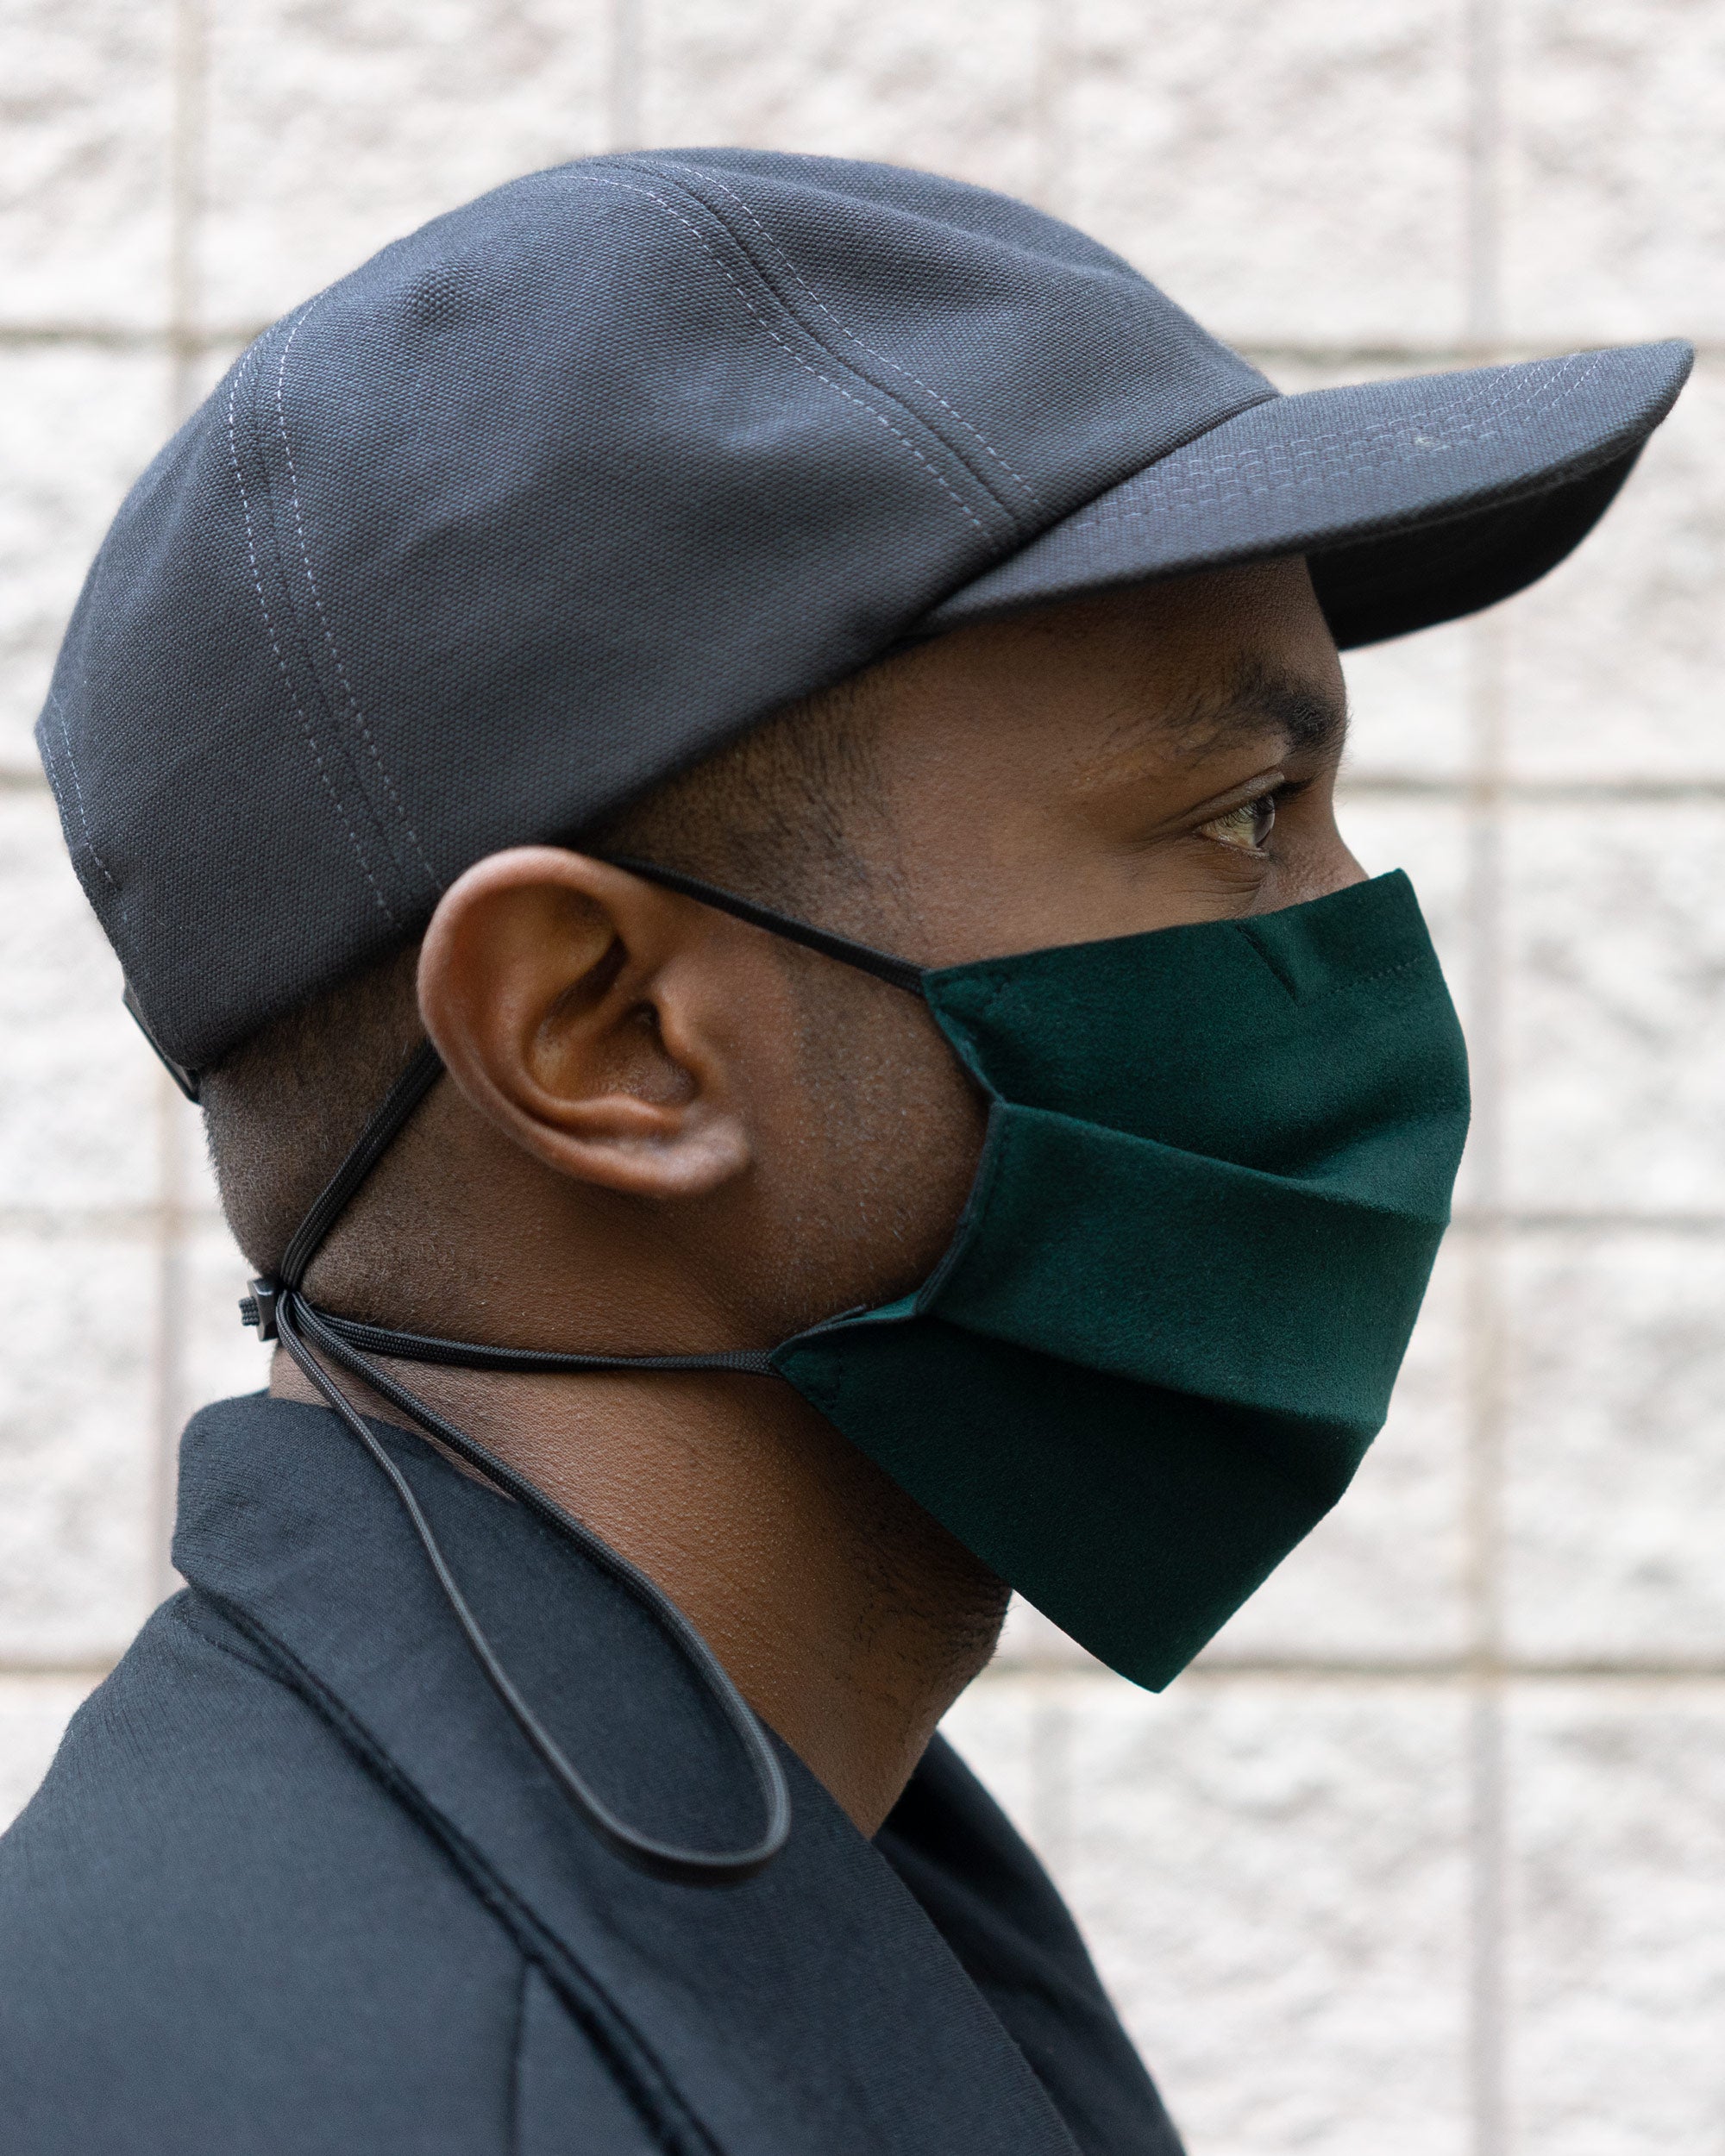 Darren in the Charcoal Duckcap and a Dark Green Mask 004, profile view